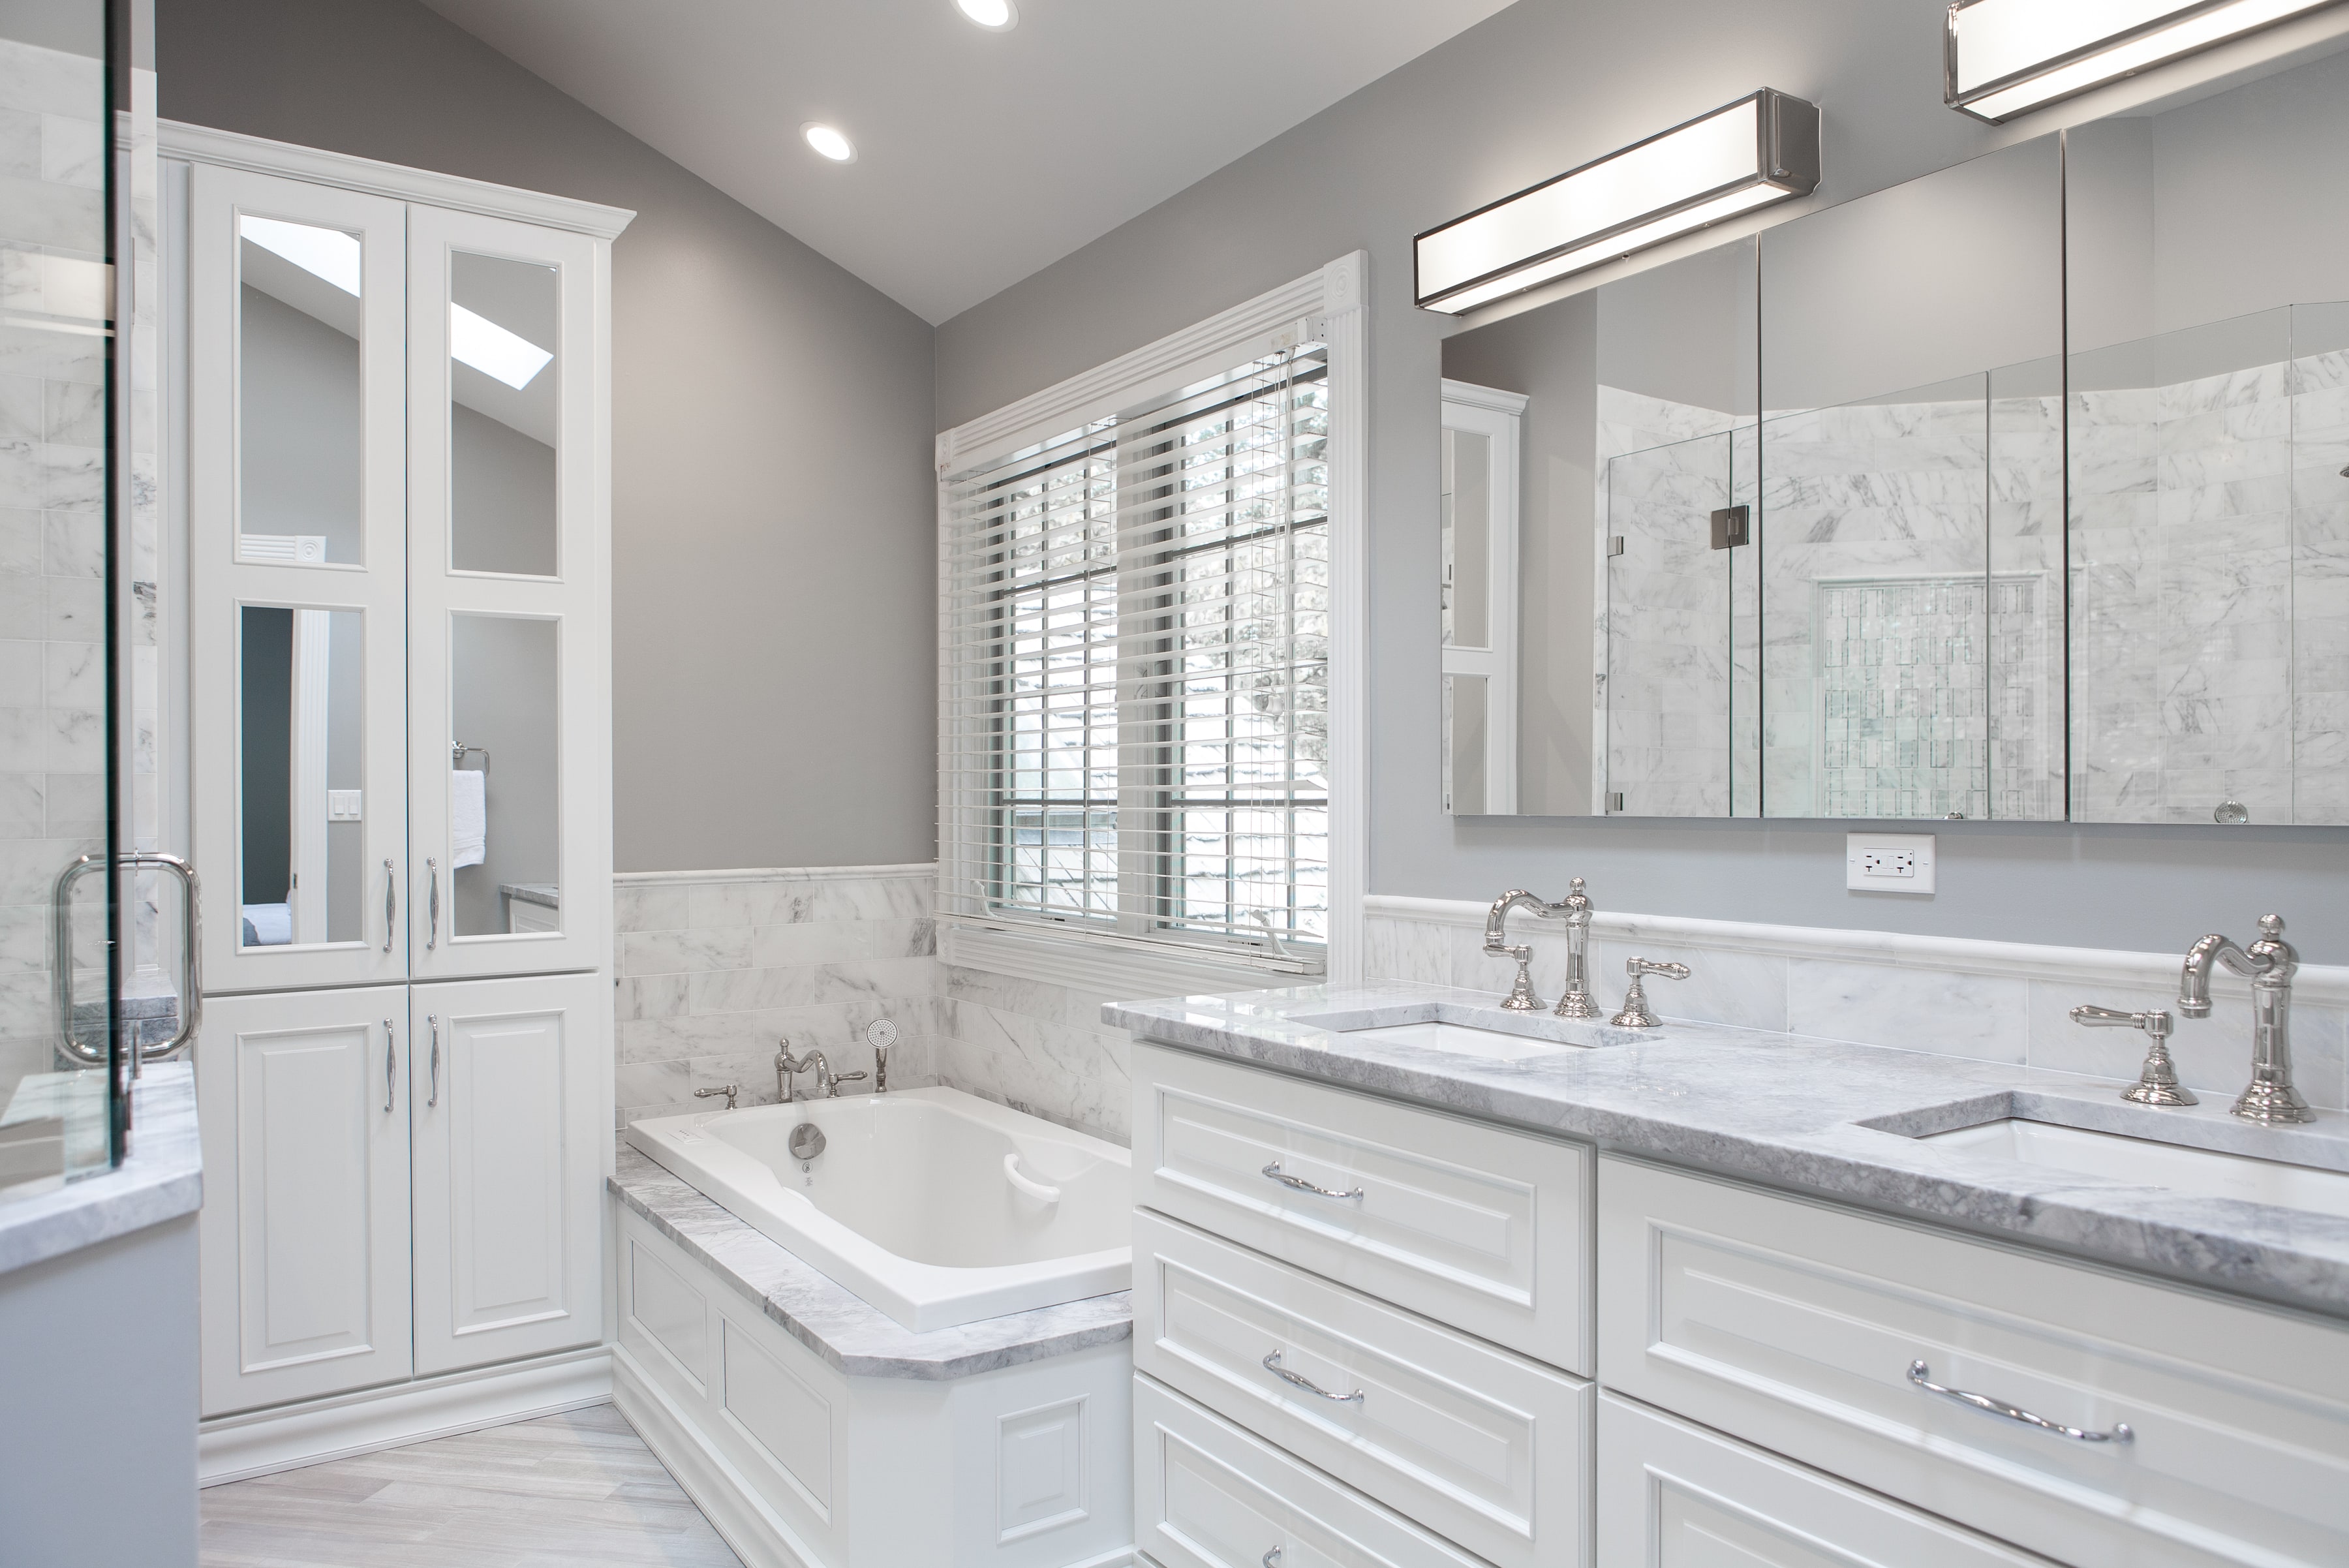 Average Cost Of A Master Bathroom Remodel Riset